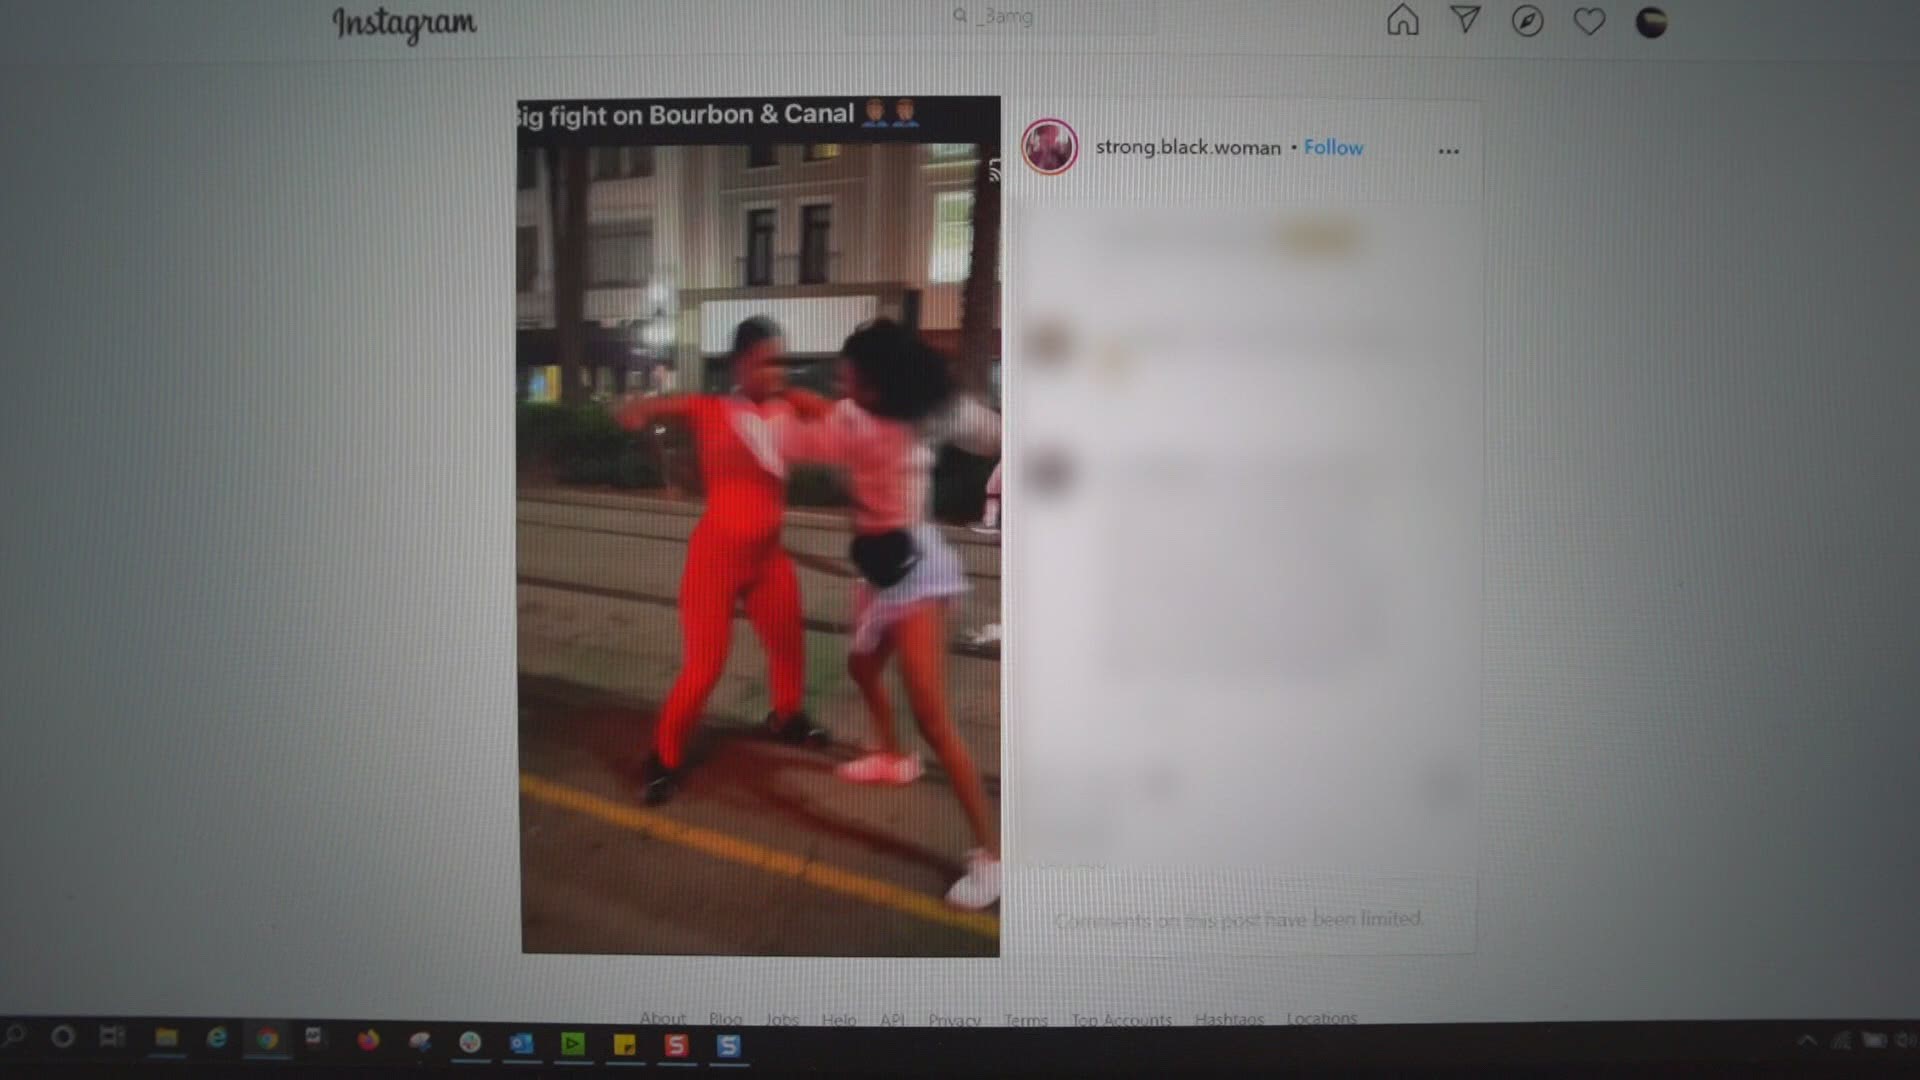 A viral video of a large fight near Canal and Bourbon Streets this weekend has New Orleans business owners concerned about the image it portrays to visitors.